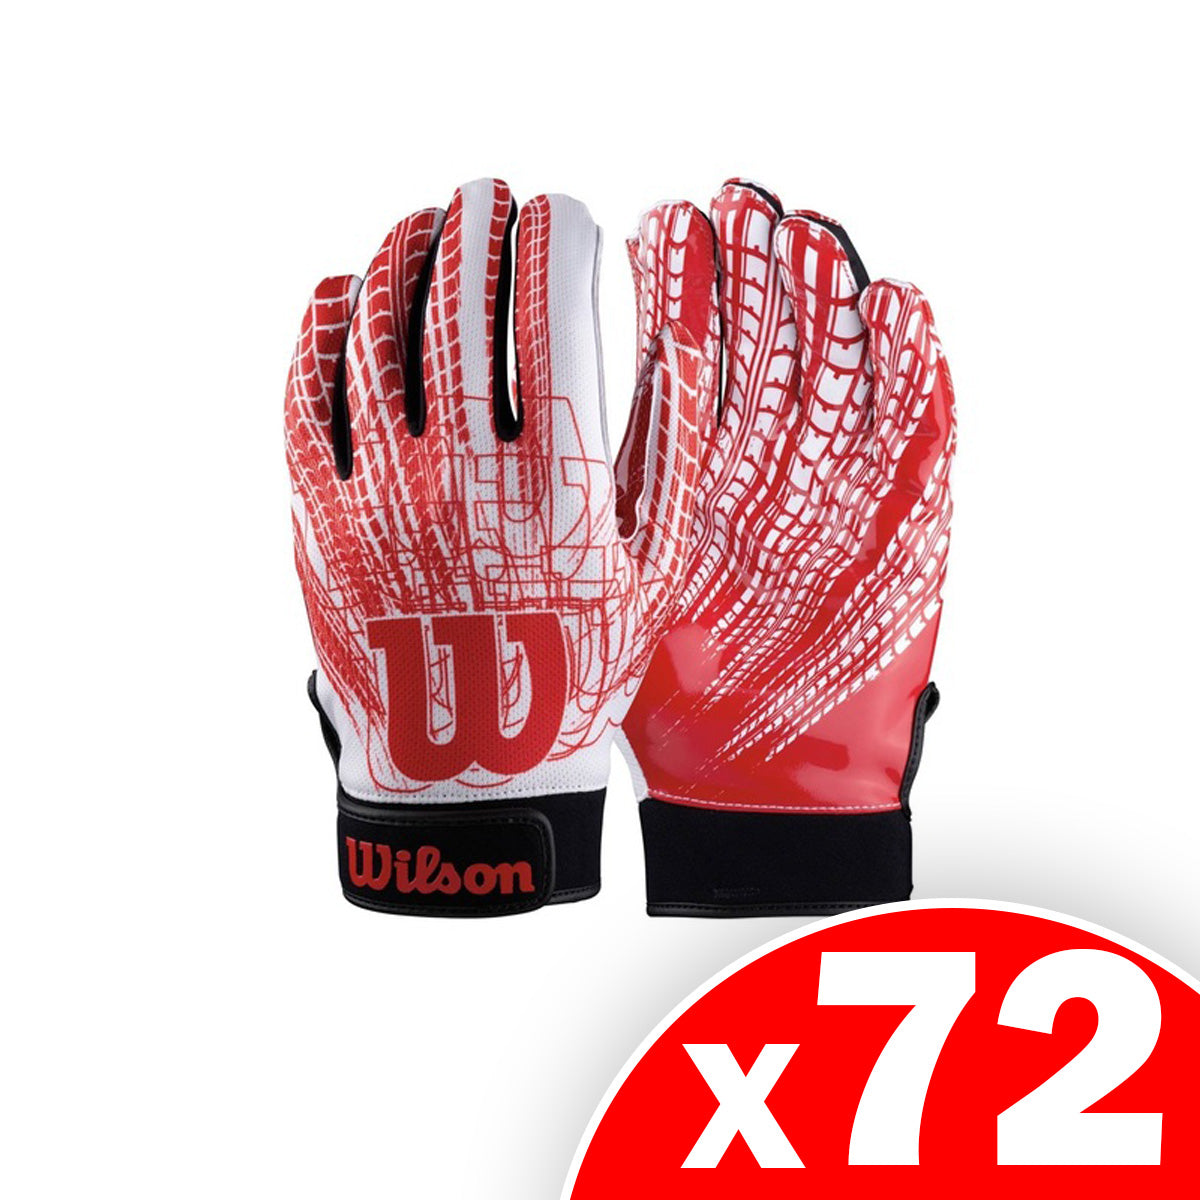 Wilson Youth Red and White Adjustable Wrist Strap Super Grip Football Gloves, Size Large, 72 Pack